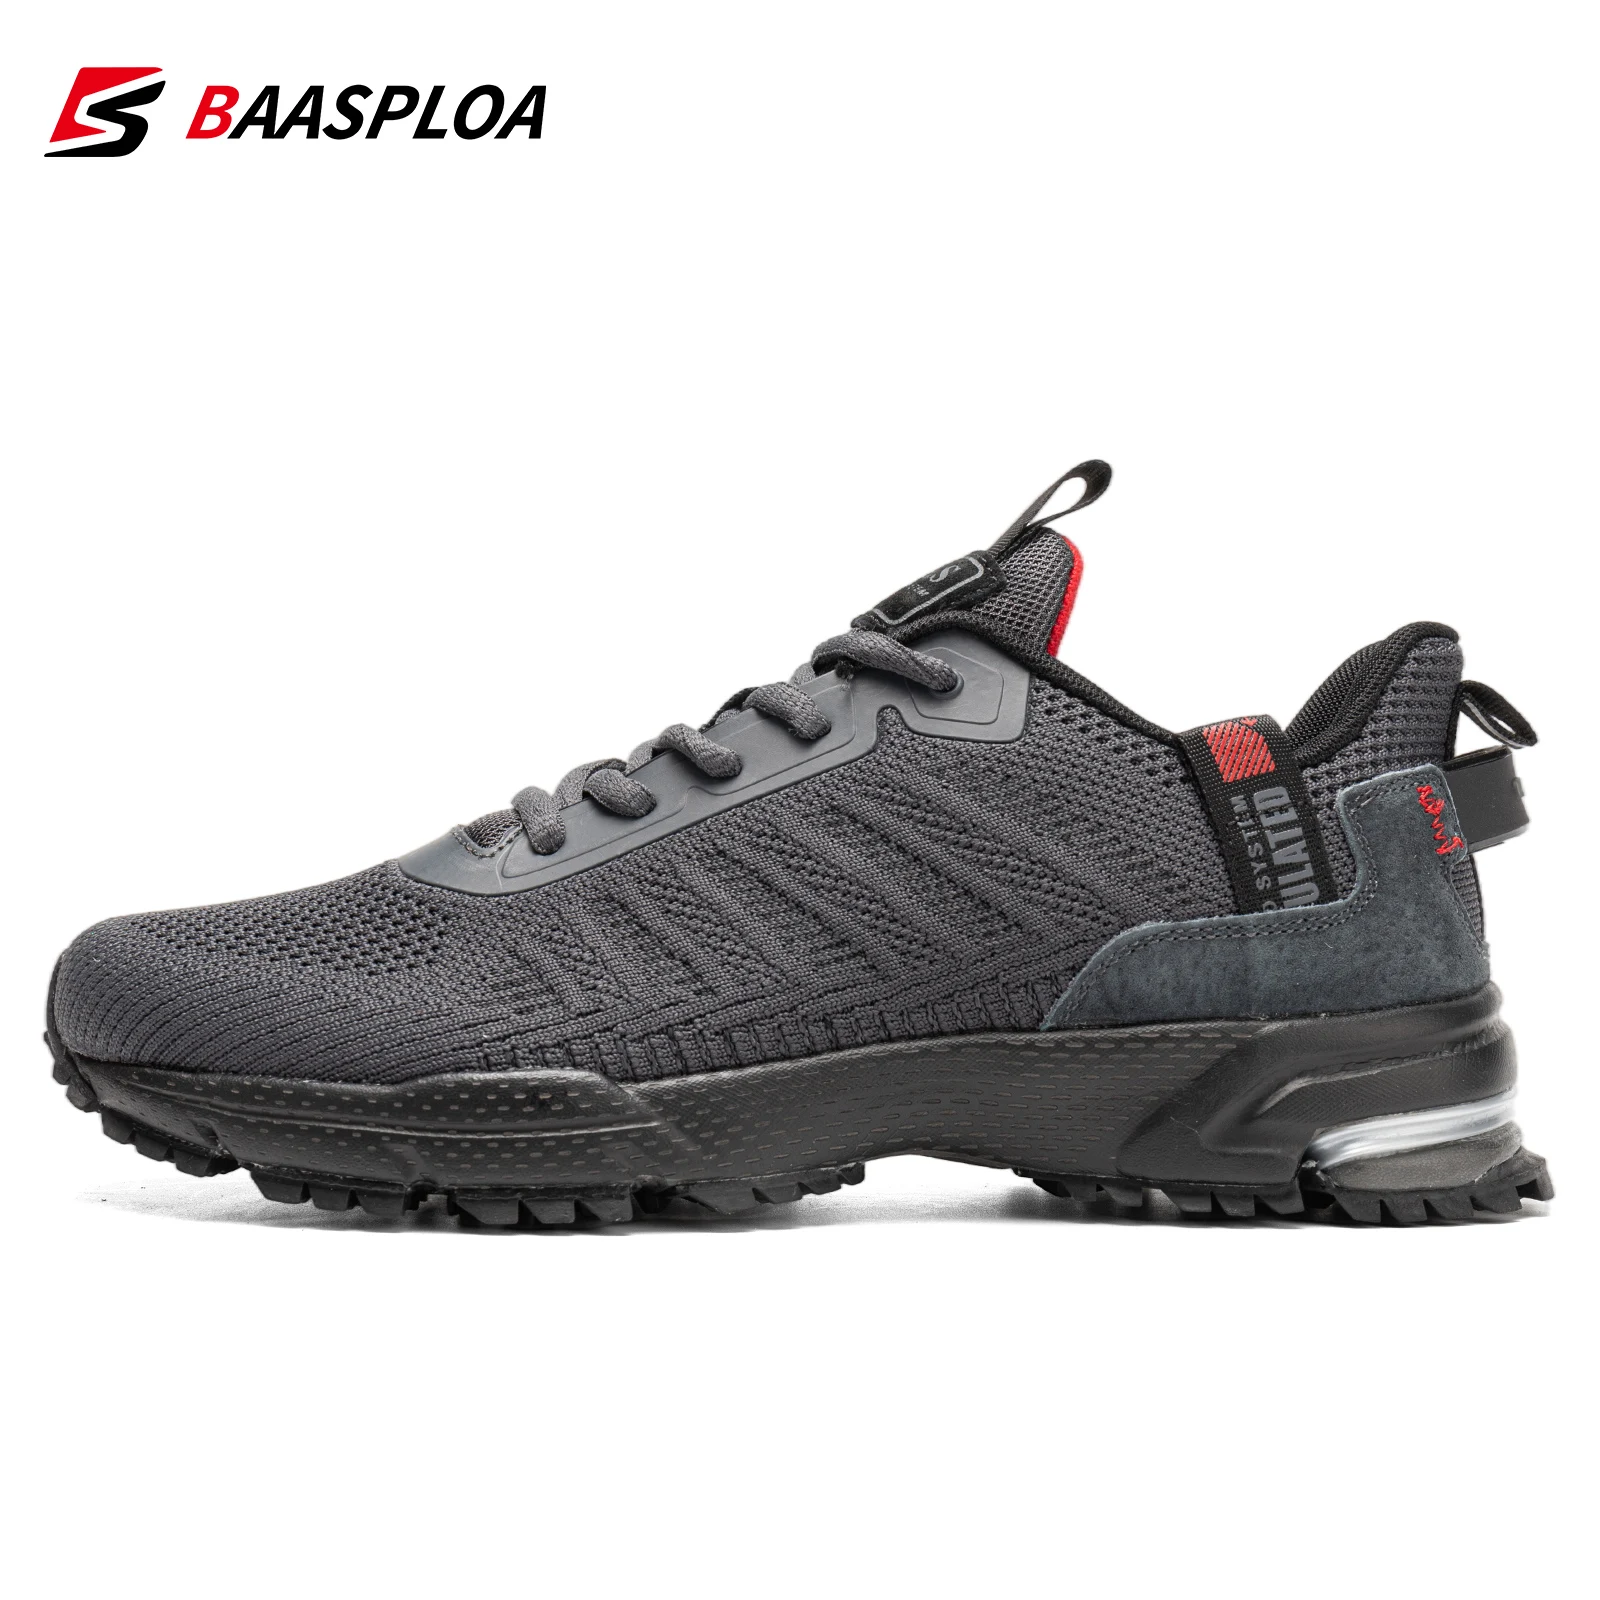 Baasploa Professional Running Shoes For Men Lightweight Men's Designer Mesh Sneakers Lace-Up Male Outdoor Sports Tennis Shoe